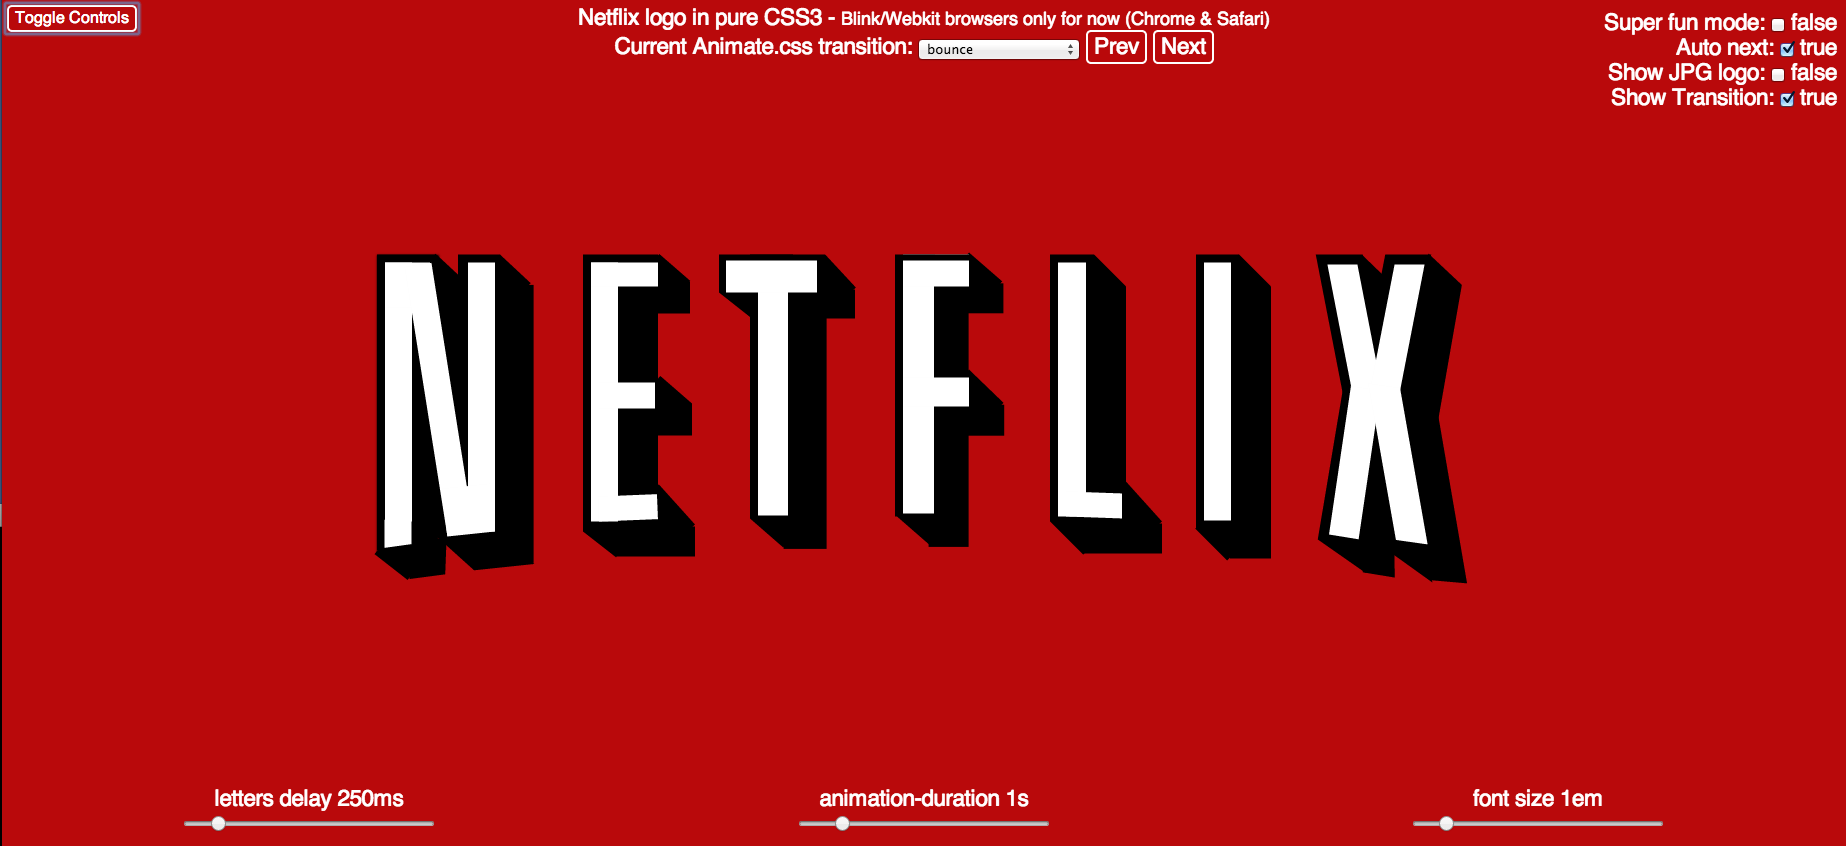 Netflix Logo in pure CSS